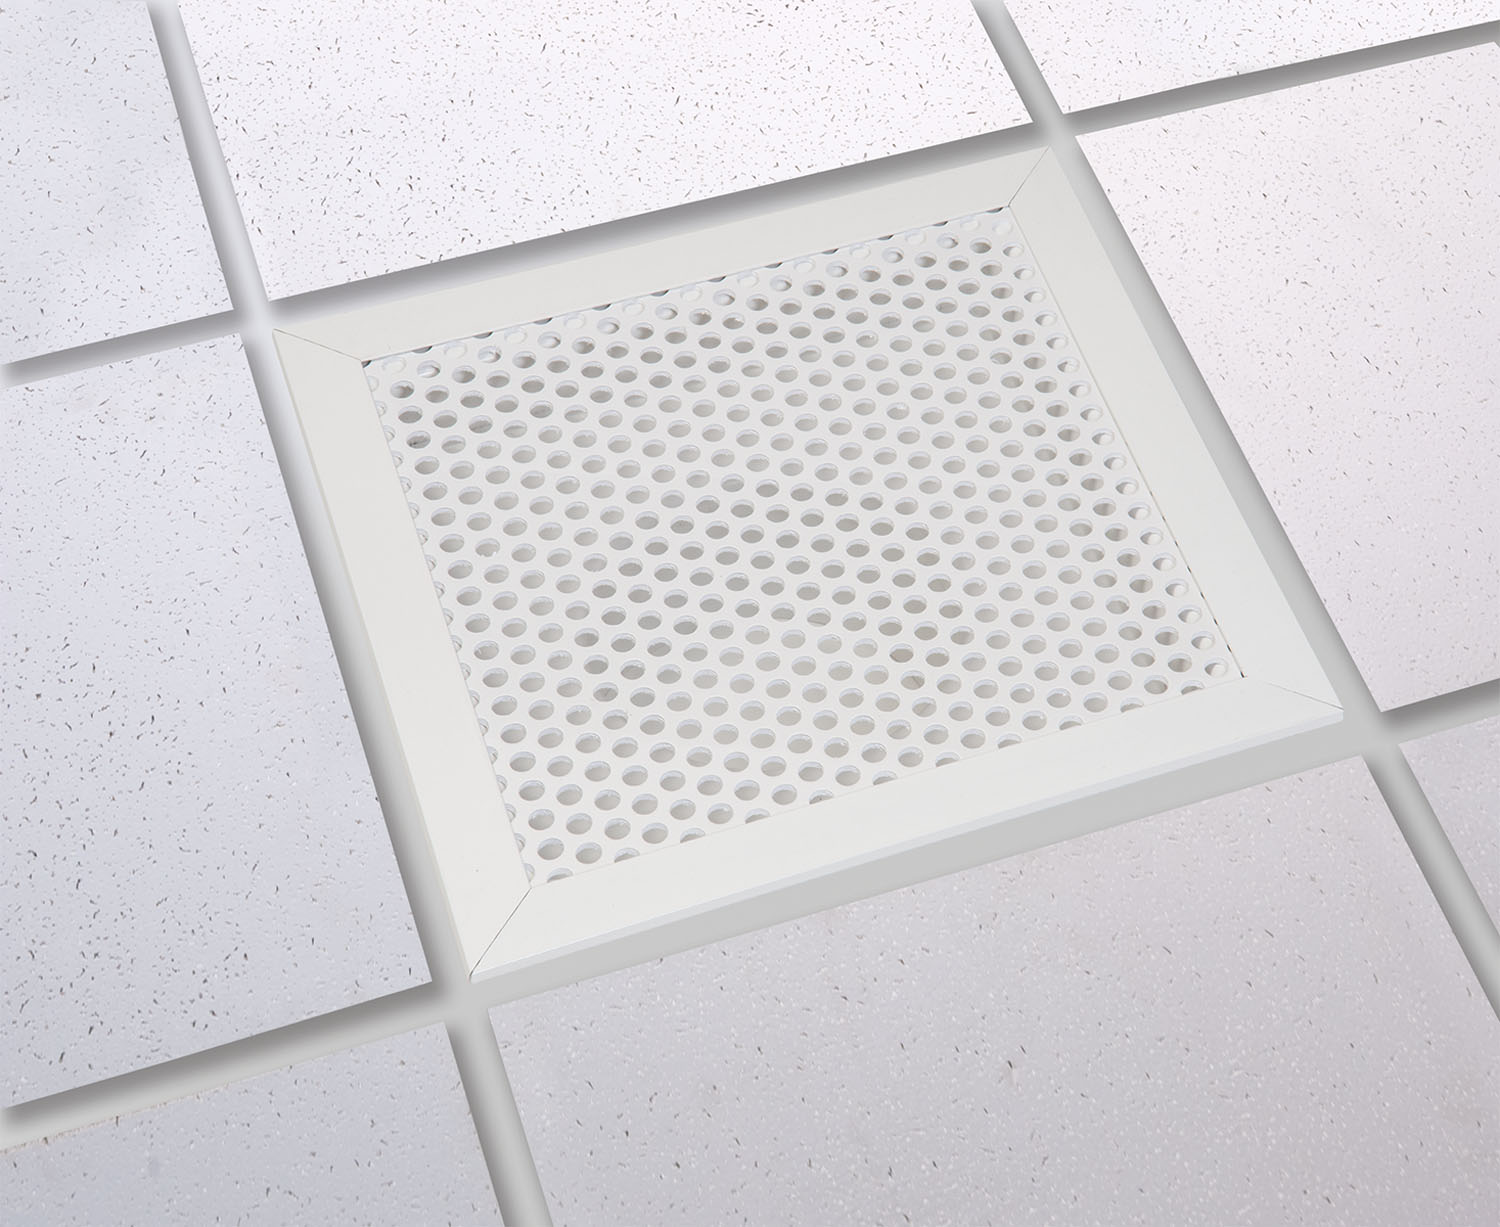 Air Return 12 X 12 Perforated Hole Pattern With Recessed Body Diffuser Return